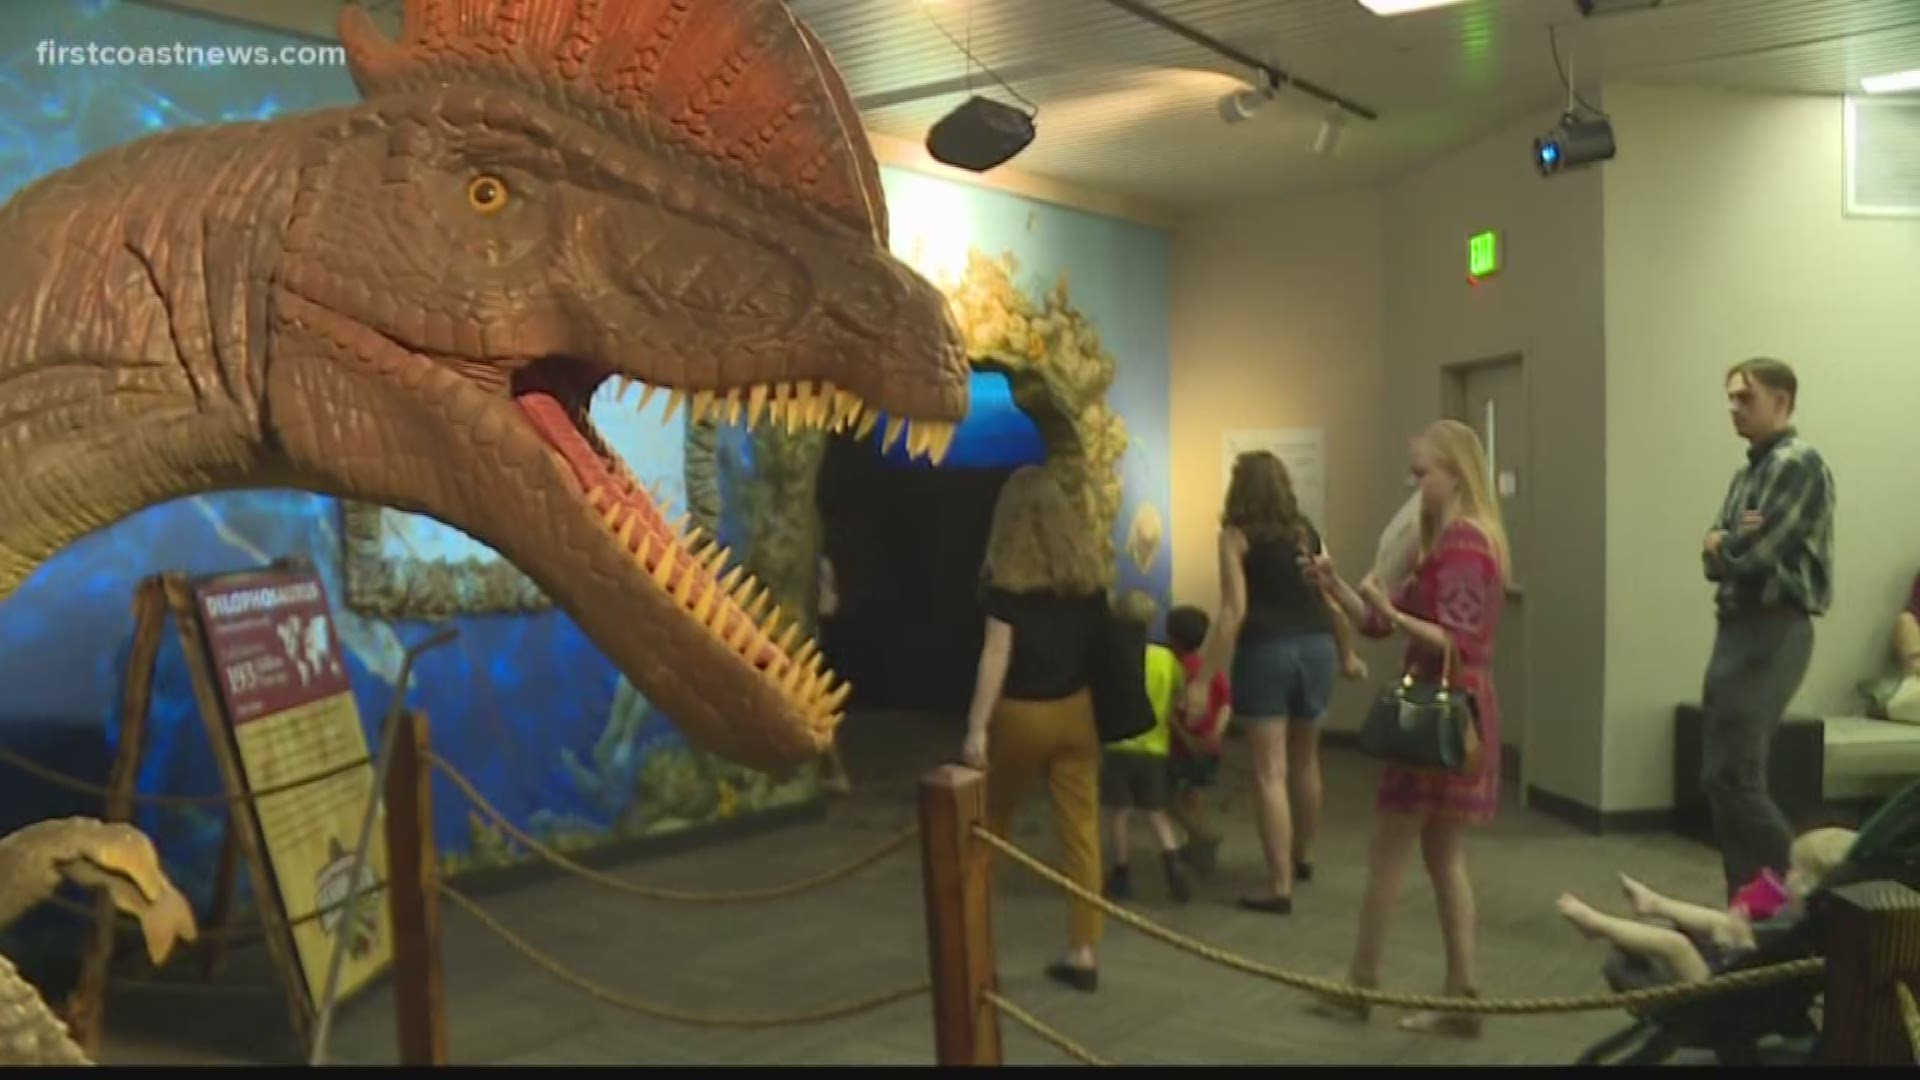 The exhibit will allow you to experience life-size, lifelike animatronic dinosaurs that move and make sounds.